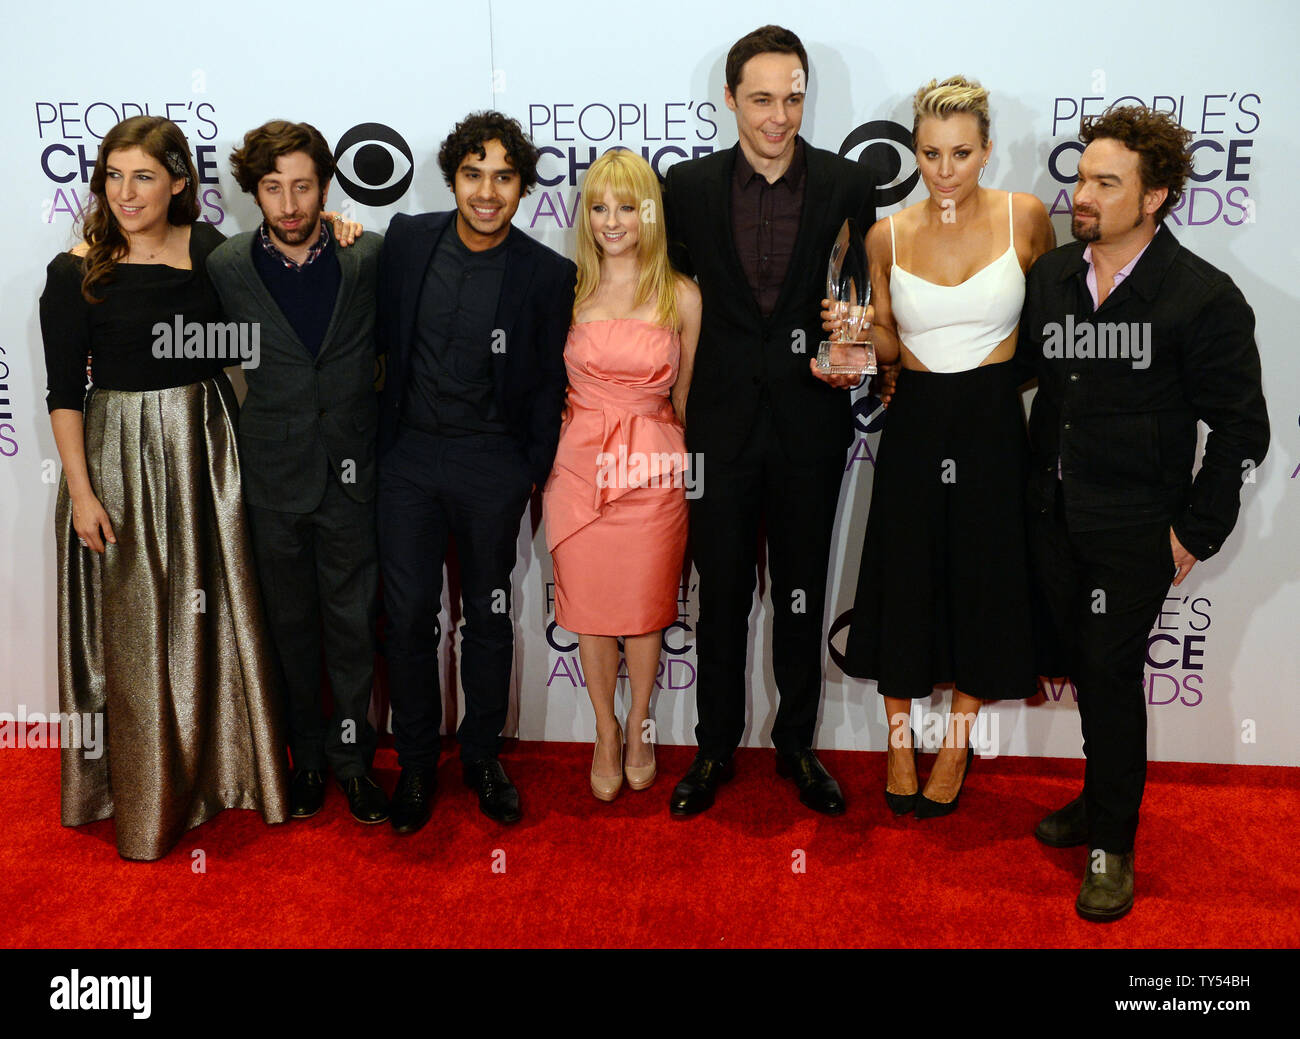 Cast members in the television comedy series "The Big Bang Theory" Mayim  Bialik, Simon Helberg, Kunal Nayyar, Melissa Rauch, Jim Parsons, Kaley  Cuoco-Sweeting and Johnny Galecki (l-R) appear backstage with the award